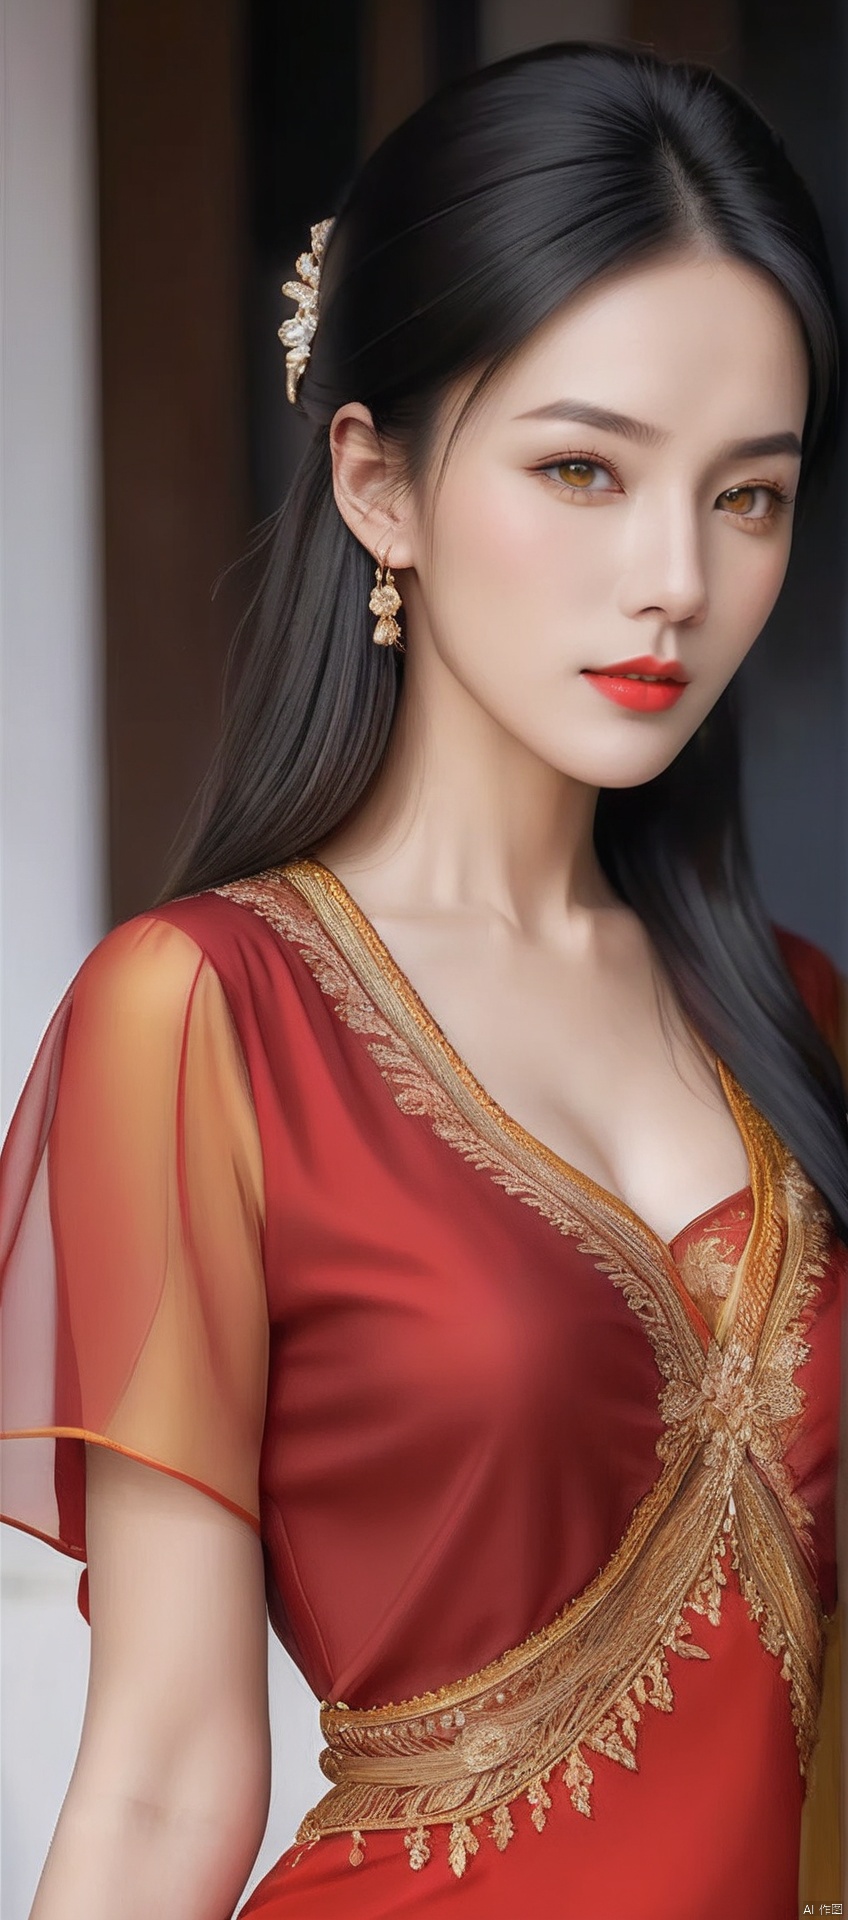 8k,RAW, Fujifilm XT3, masterpiece, best quality, photorealistic,1girl,solo, diamond stud earrings, long straight black hair, hazel eyes, serious expression, slender figure, wearing a red and gold blouse,red and gold dress,(upper body shot), (upper body view),dodger red and gold see through clothes,red and gold transparent shawl,beautiful symmetrical face,in the style of elegant clothing,skin white and smooth,high heels,g002,